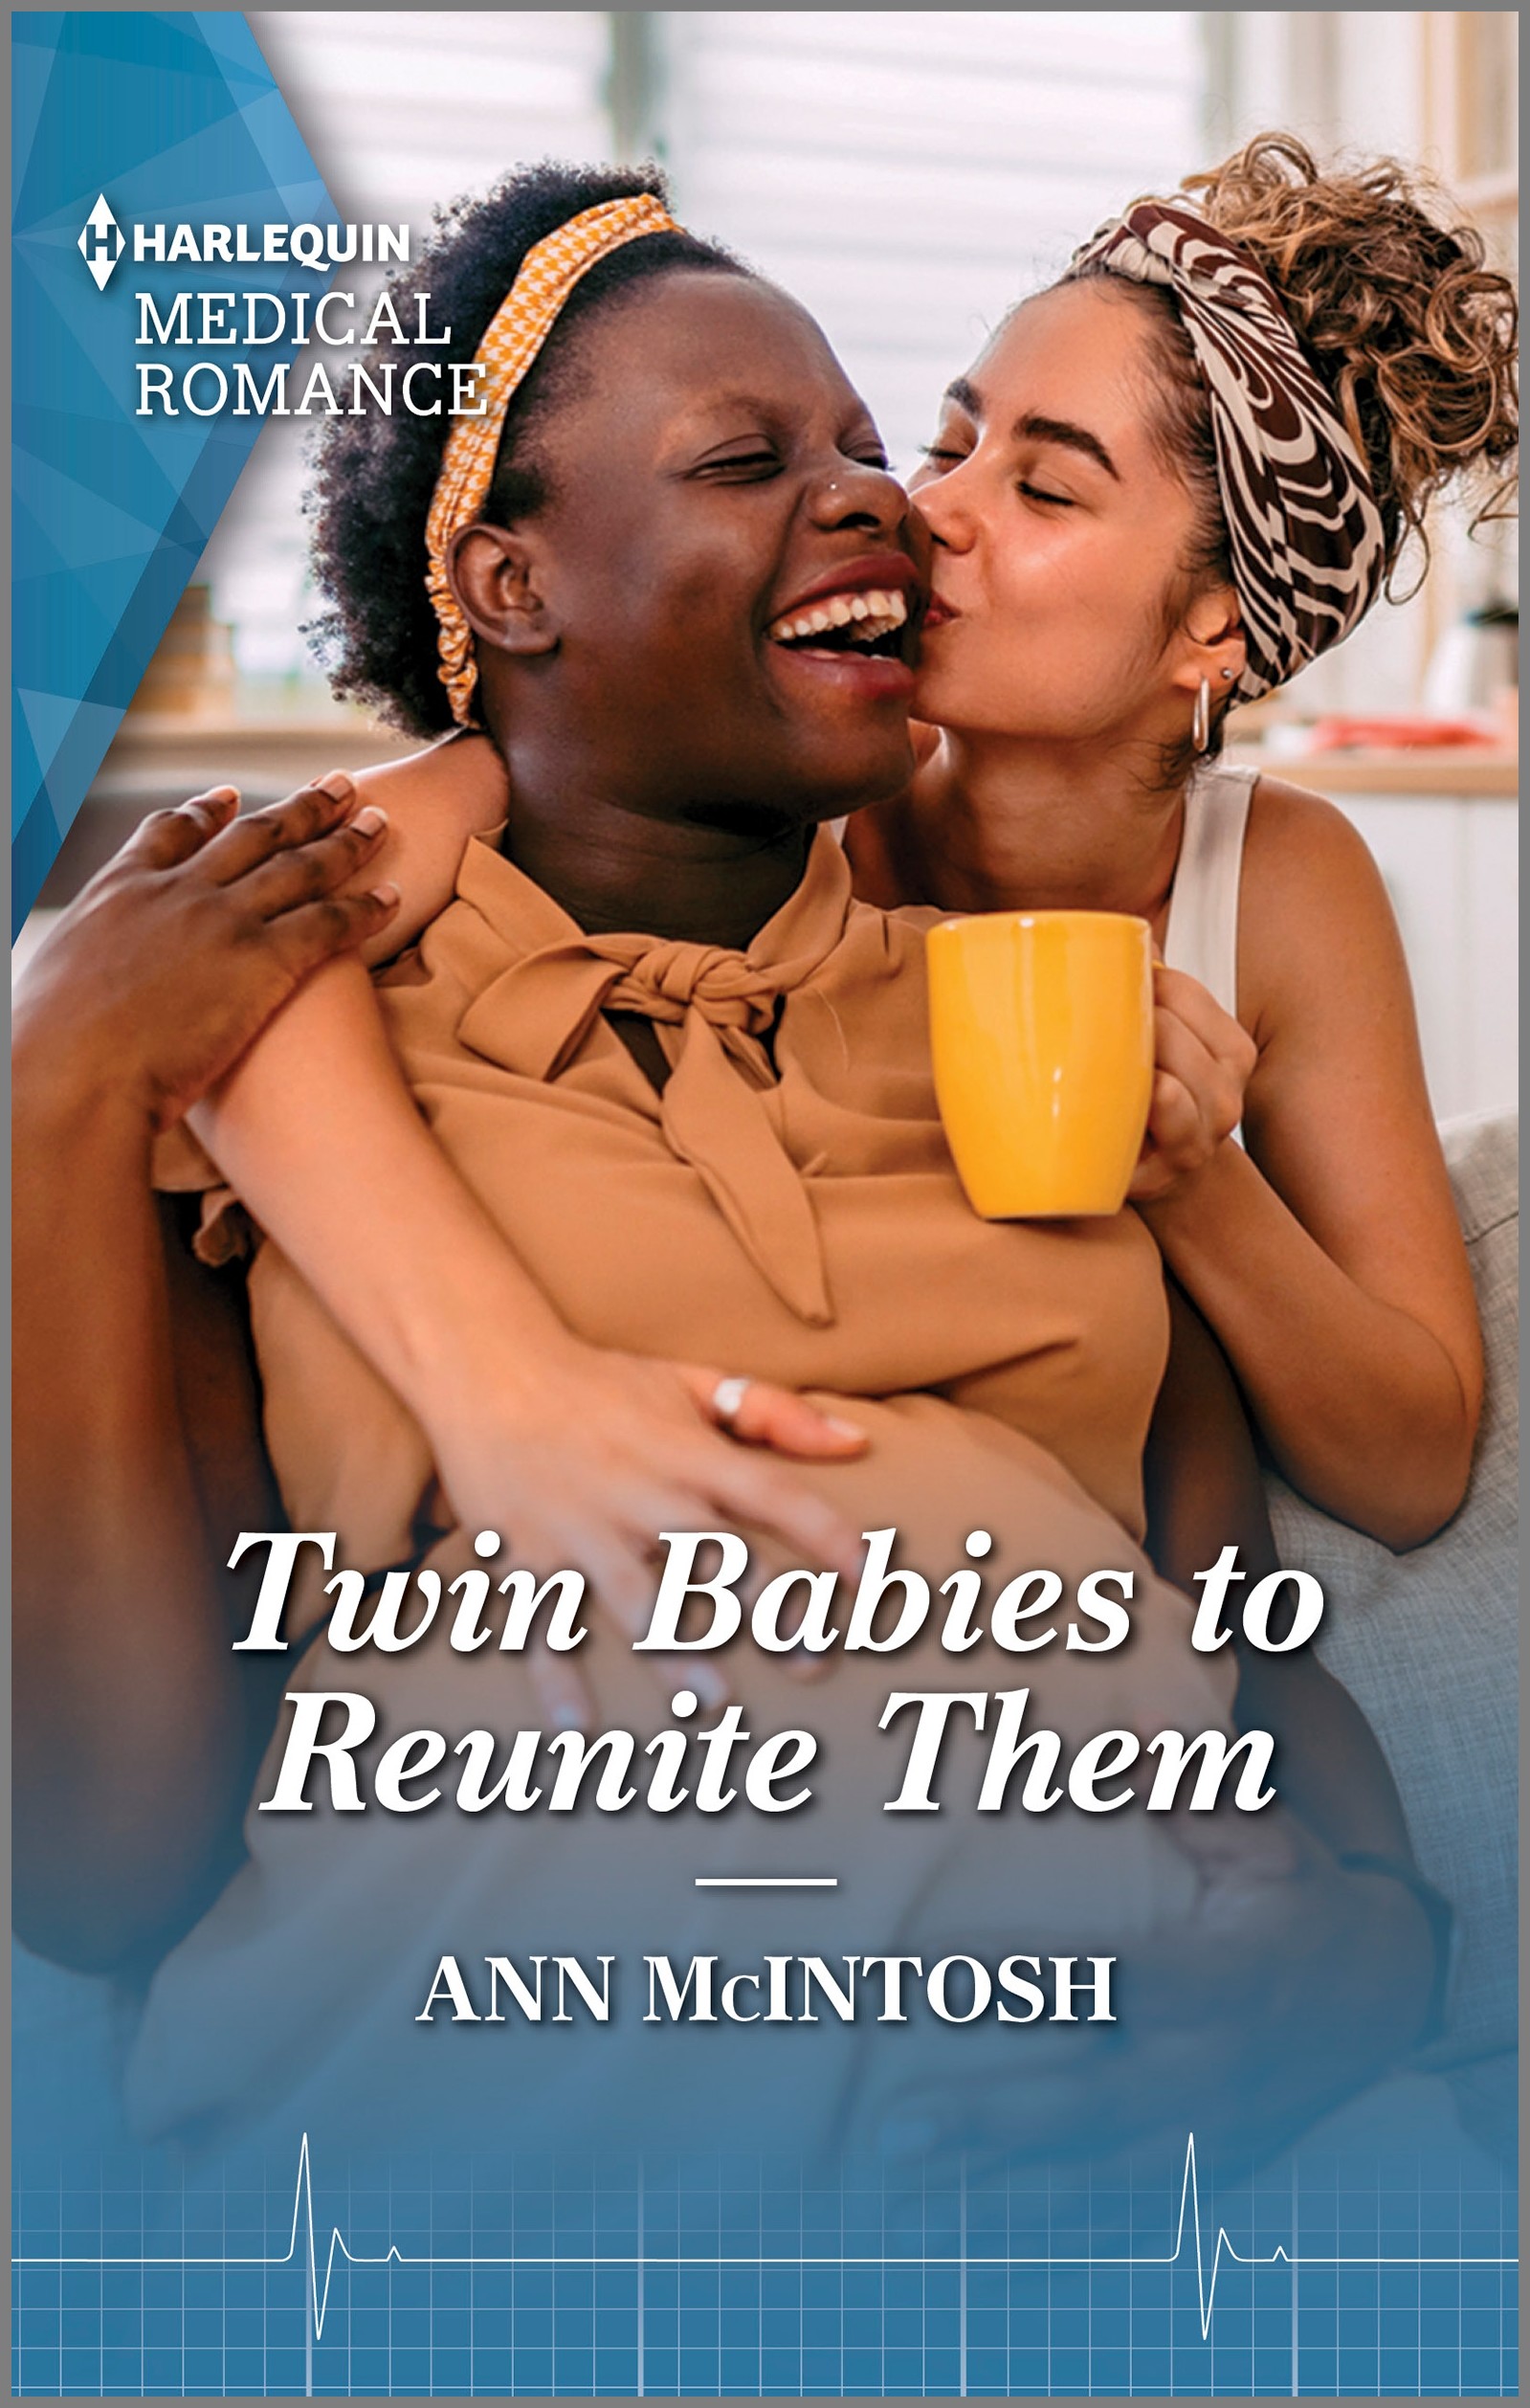 Cover image for TWIN BABIES TO REUNITE THEM by Ann McIntosh, featuing a woman sitting in a chair. Another woman is standing behind her holding a mug with an arm wrapped around the woman in the chair. They are kissing.